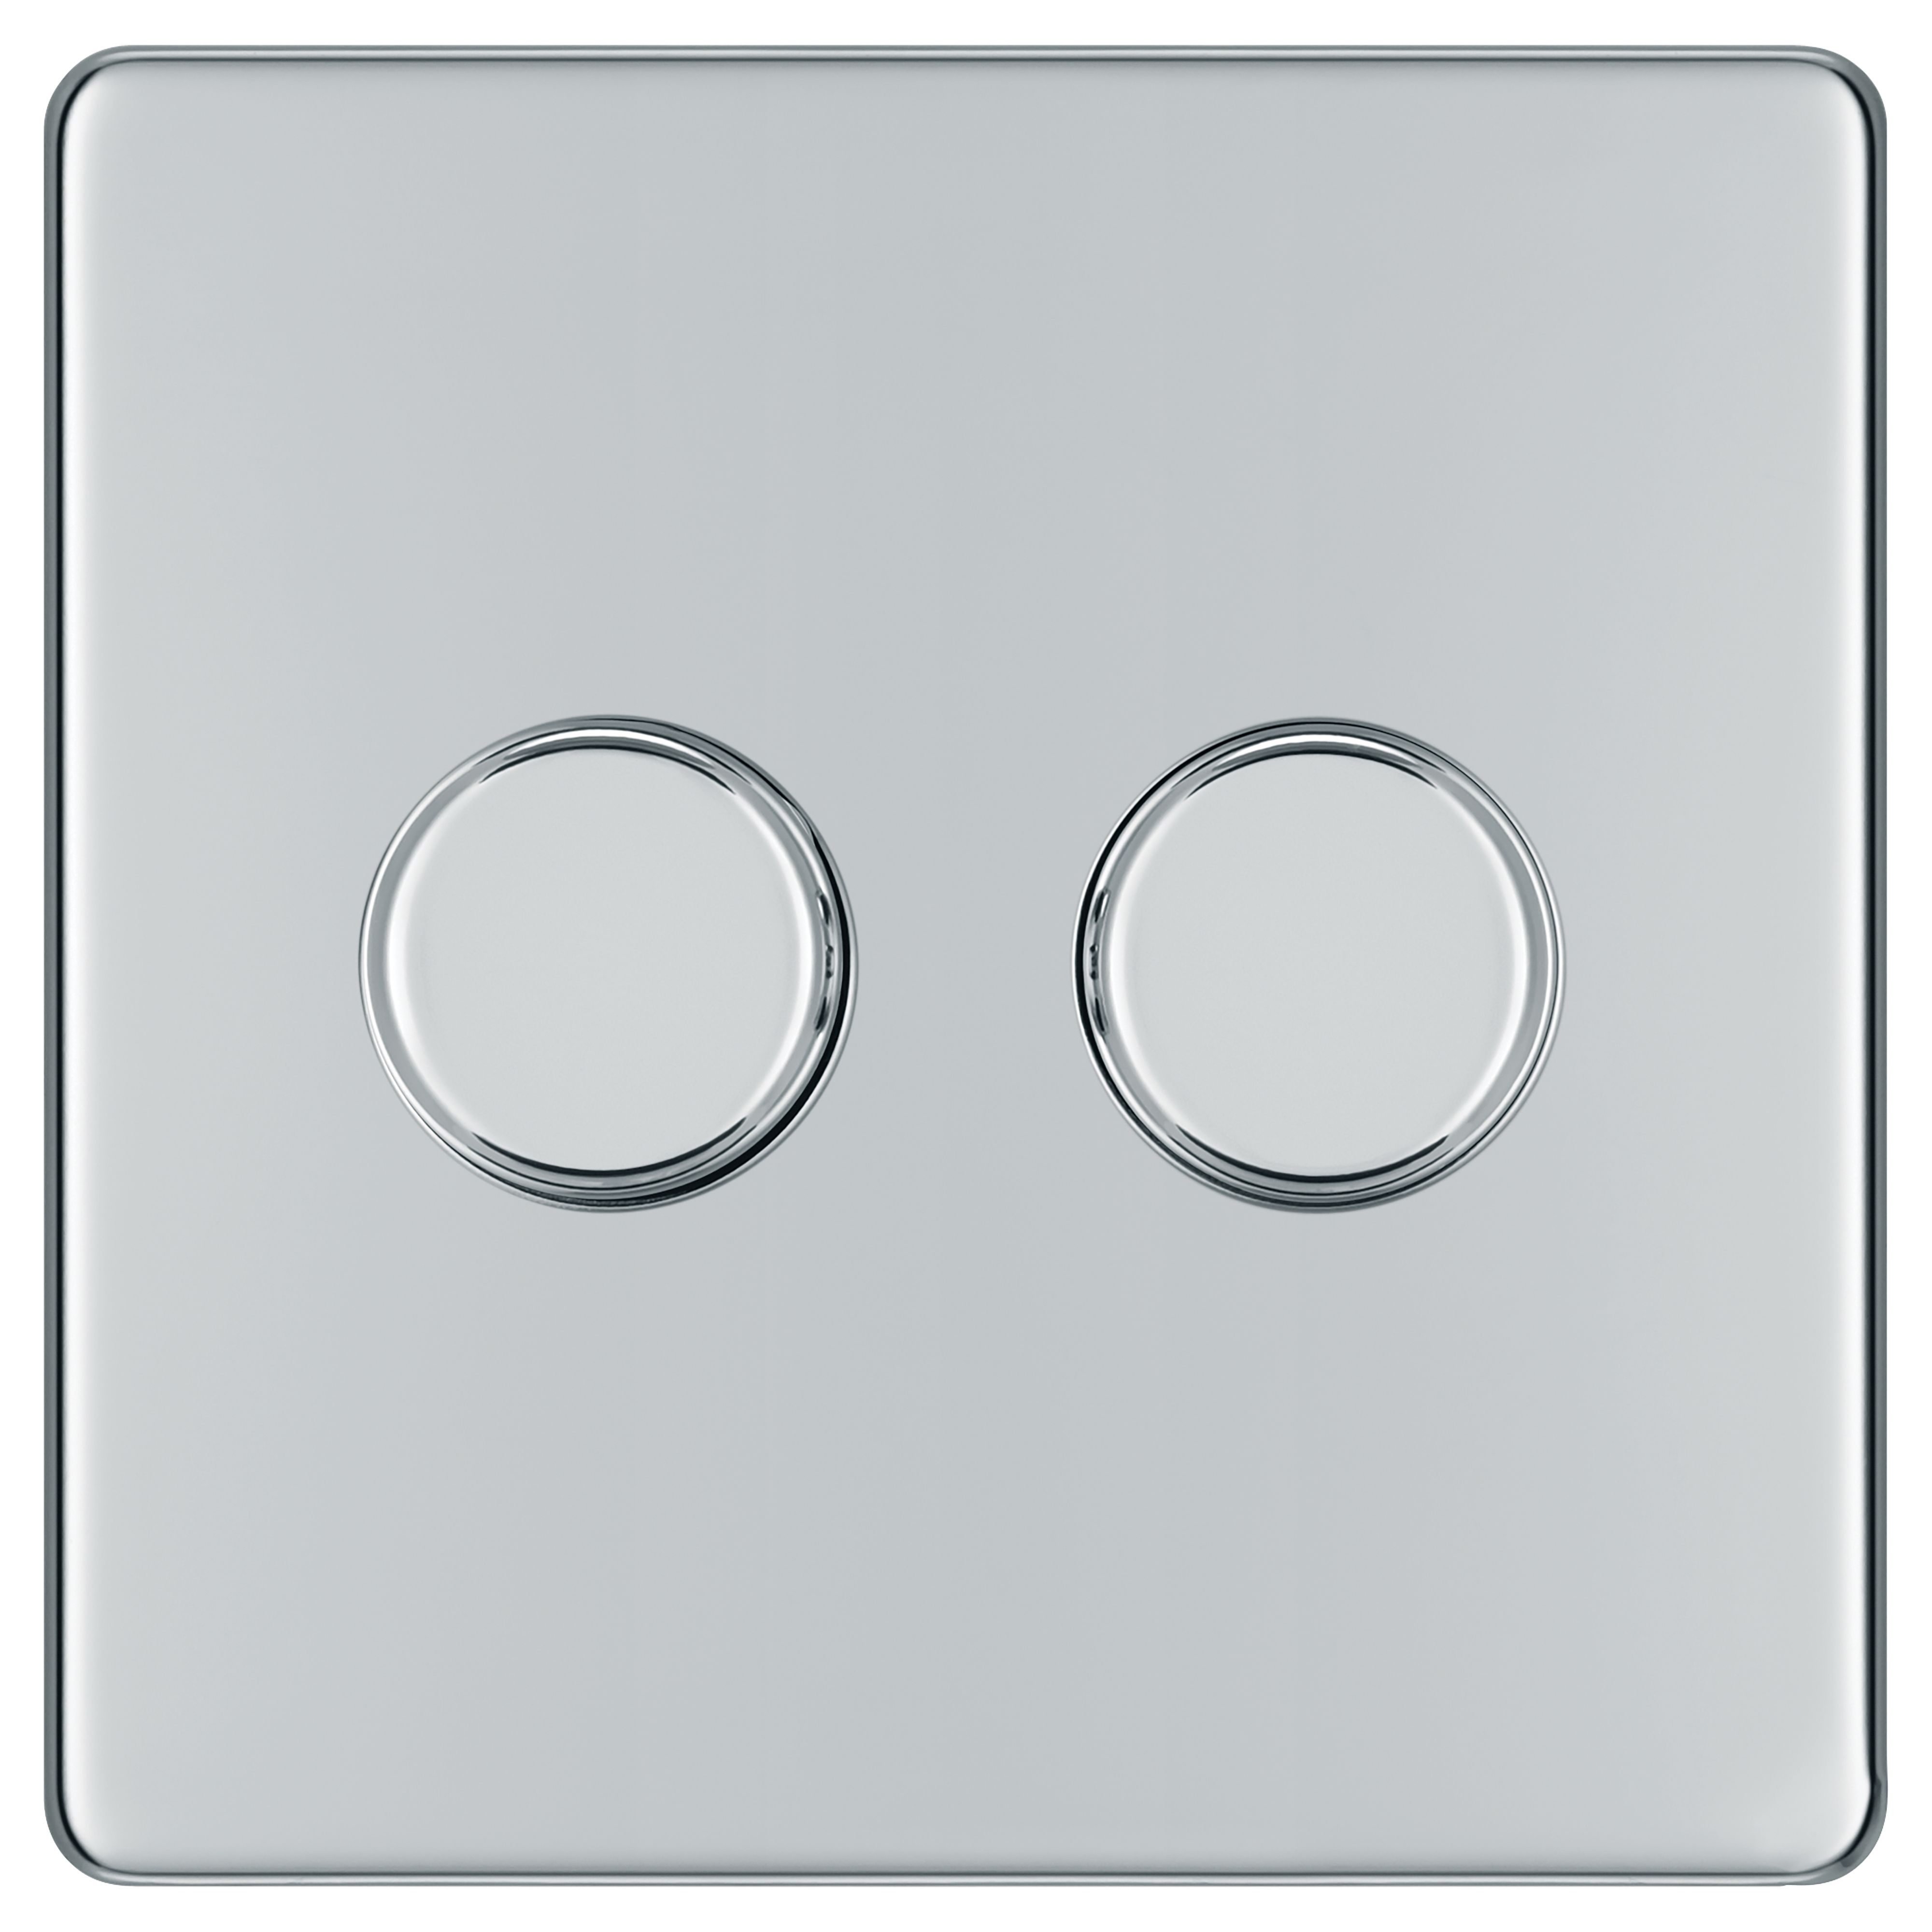 Image of BG 400W Screwless Flat Plate Double Dimmer Switch, 2-Way Push On/Off - Polished Chrome